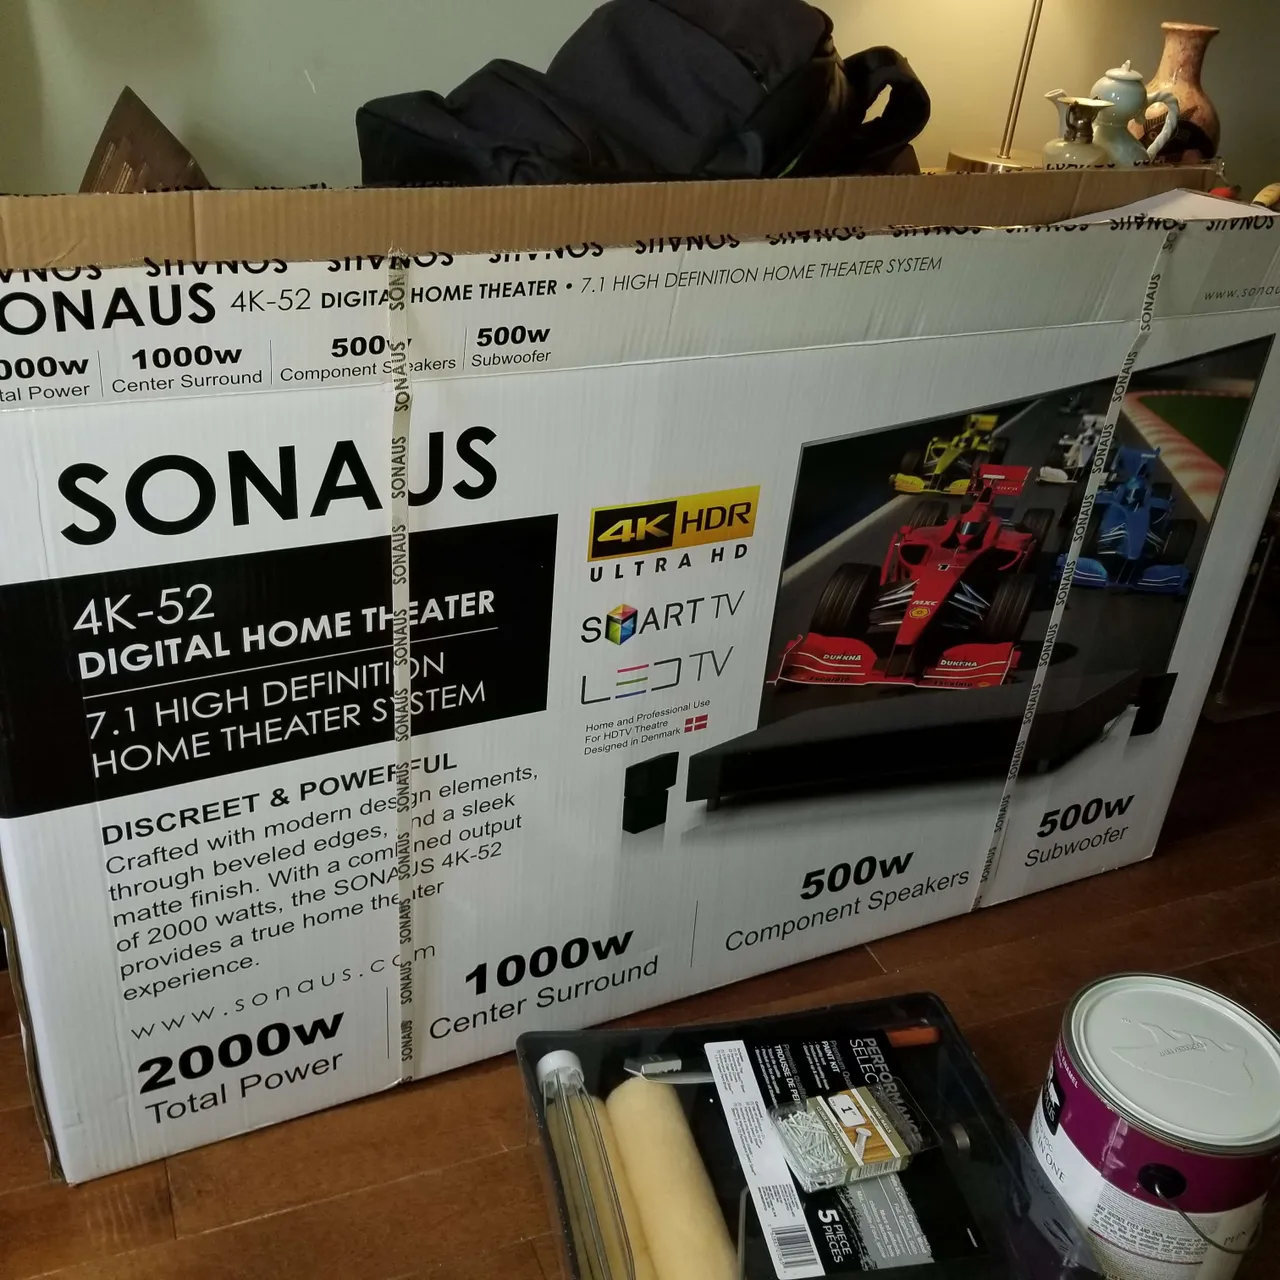 **SONAUS 4K-52**DIGITAL HOME THEATER for sale - $1000 photo 1